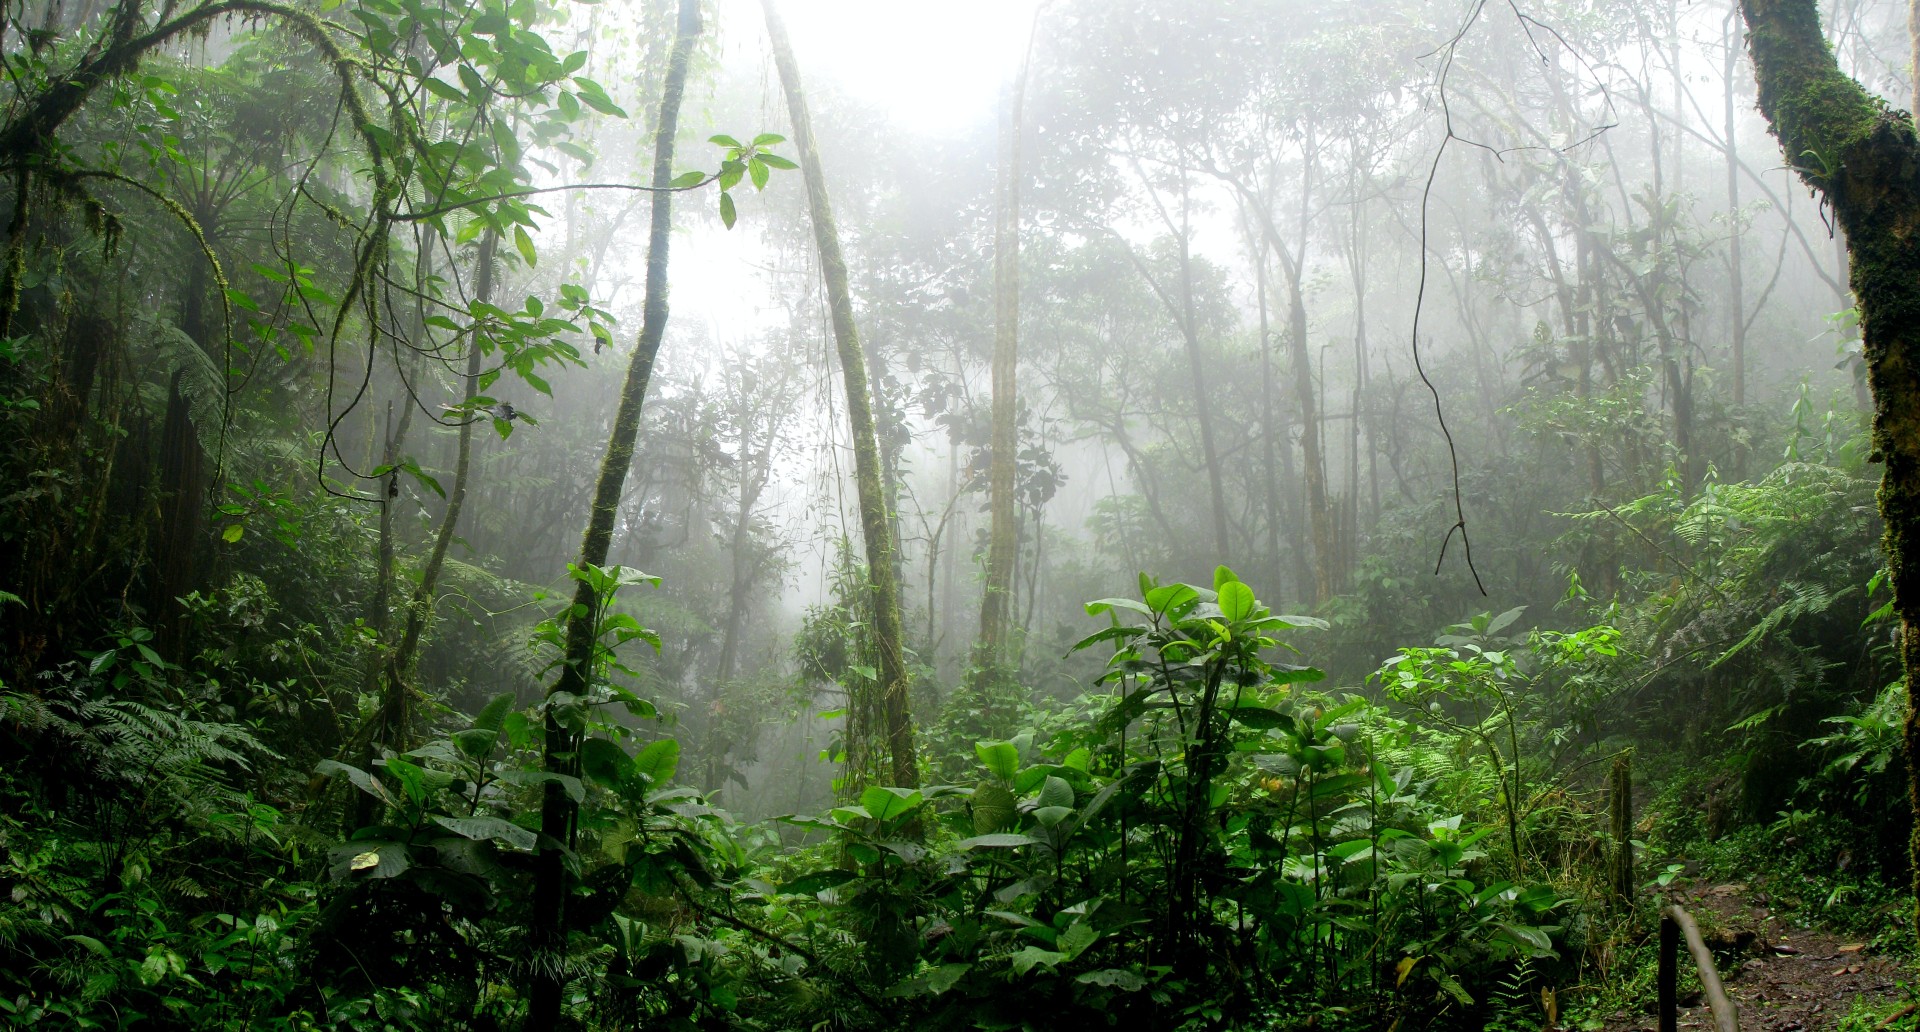 Extreme El Niño weather saw South America’s forest carbon sink switch off